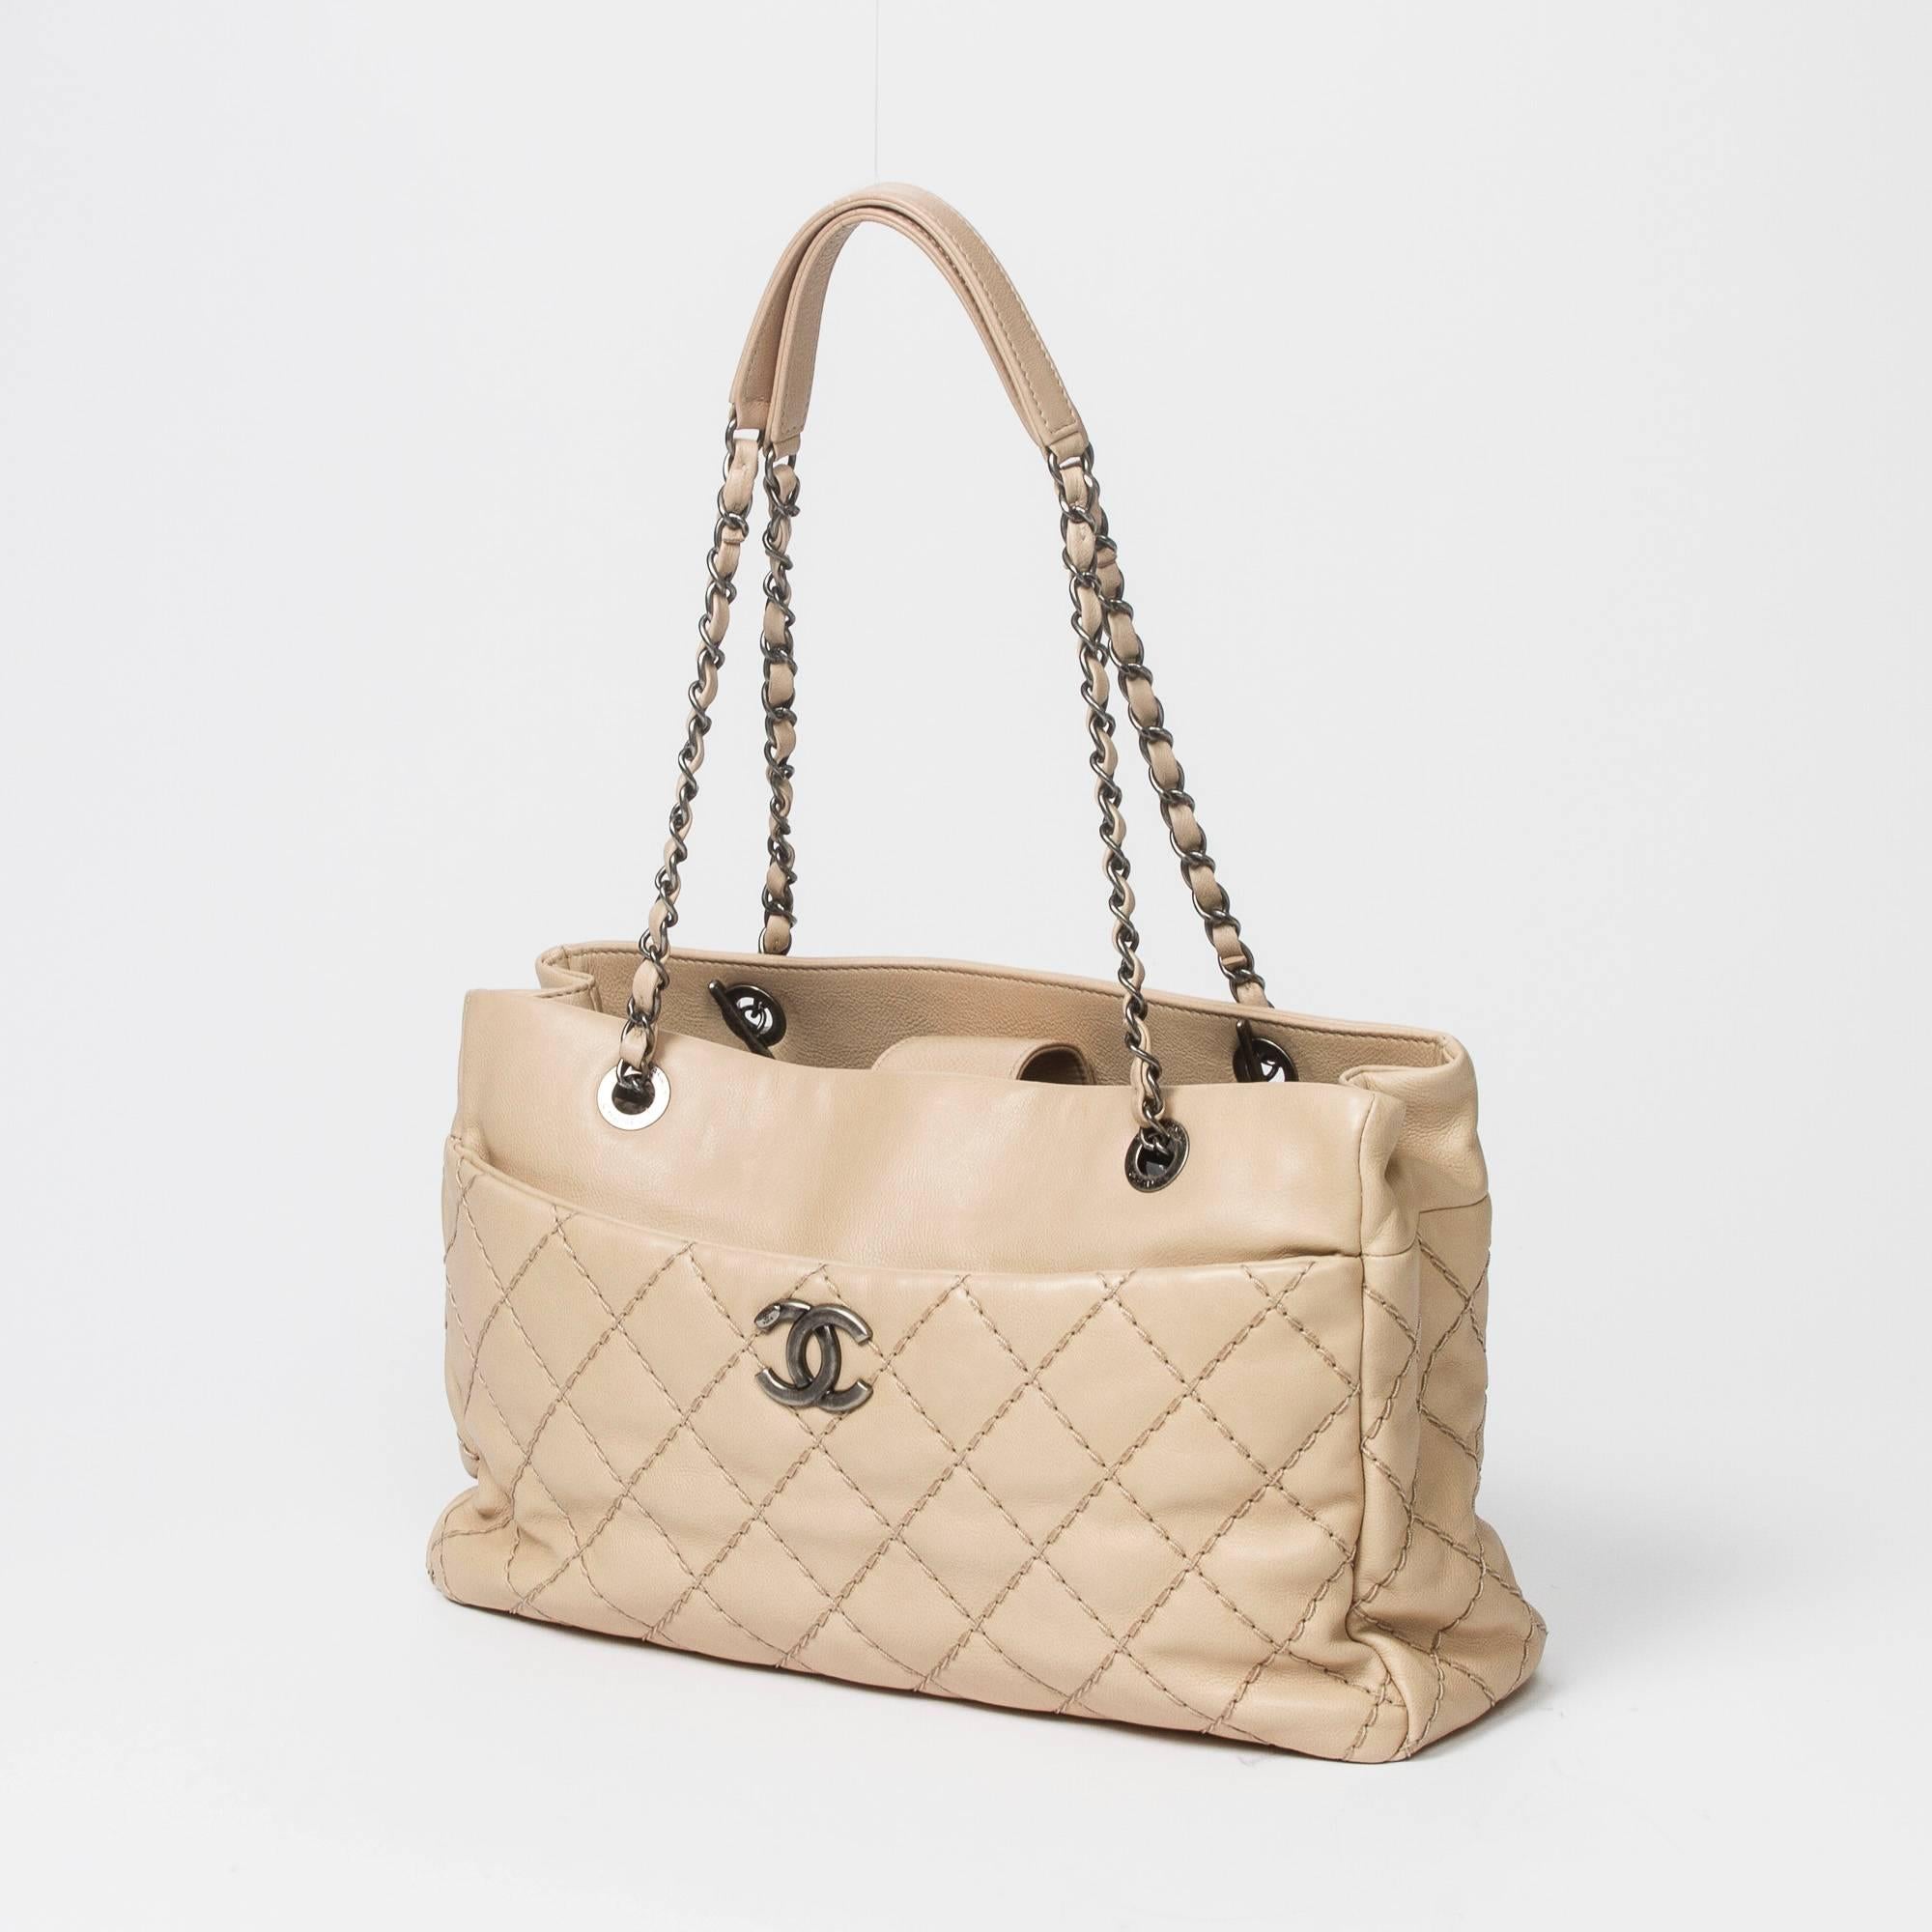 Tote in beige stitch quilted leather with antique silver tone hardware. CC front pocket with magnetic closure. 4 protective feet. Magnetic closure. 2 compartment bag with grey fabric lined interior, large zip middle comparment, 2 slip pockets and